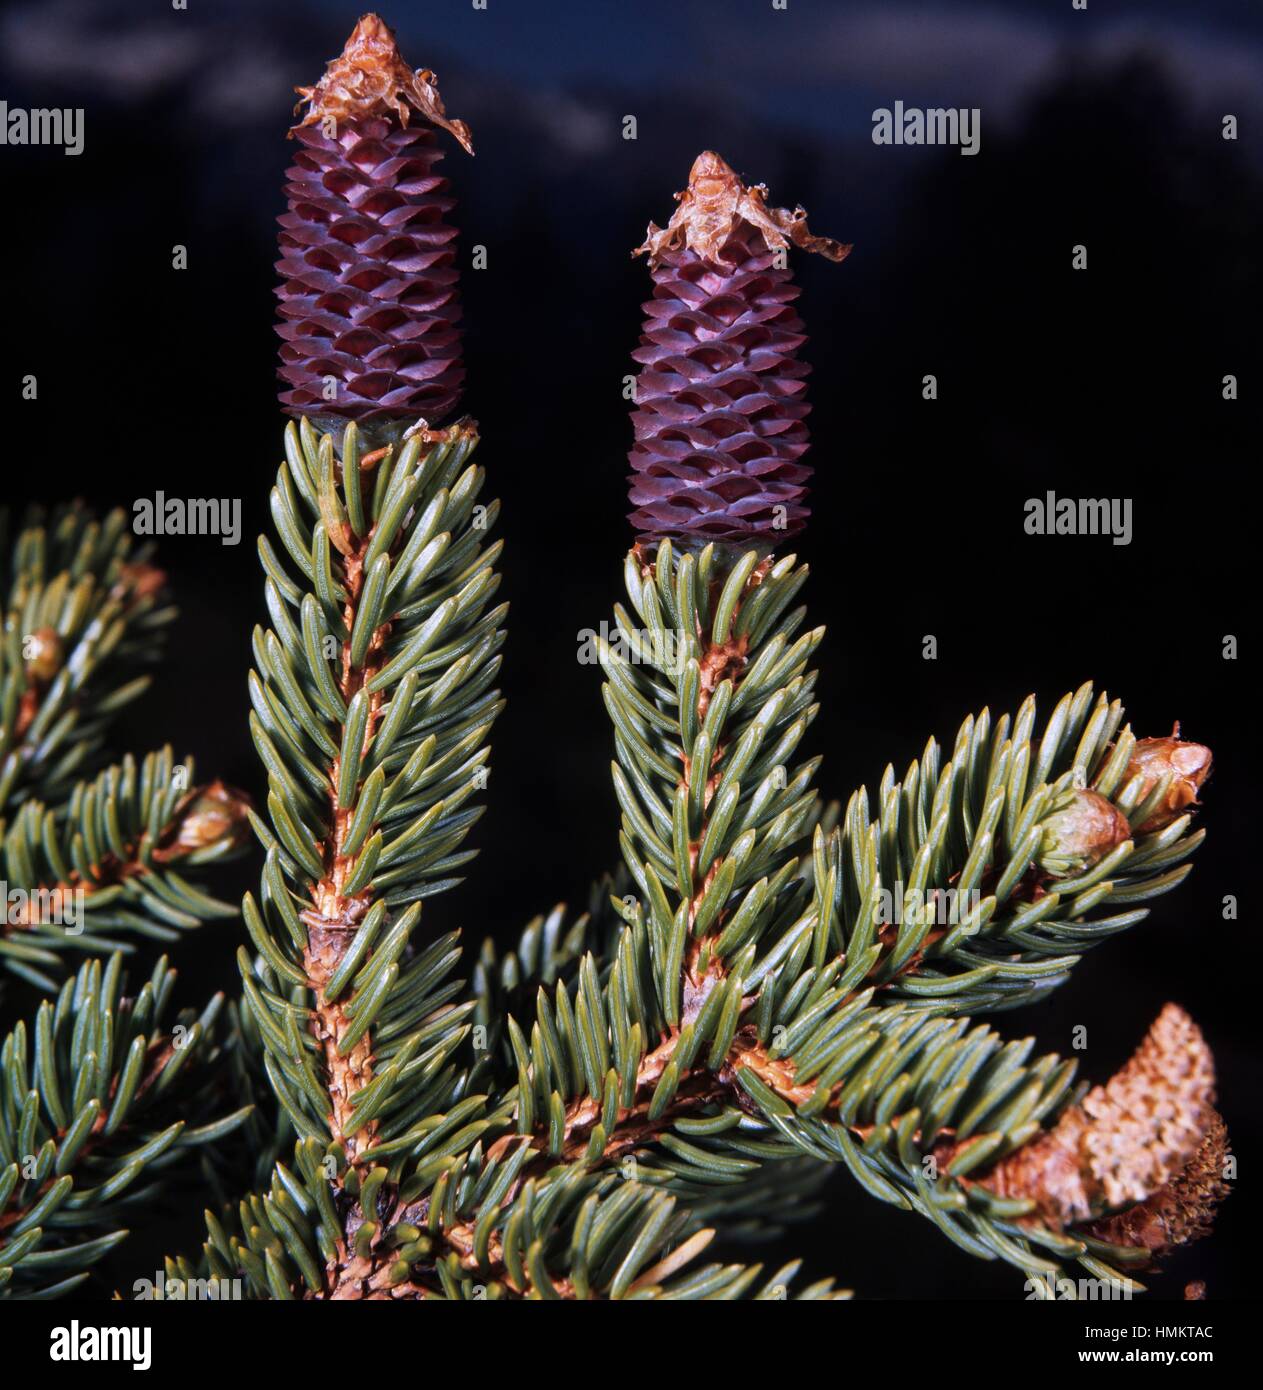 Norway Spruce or European Spruce cones (Picea abies), Pinaceae. Stock Photo